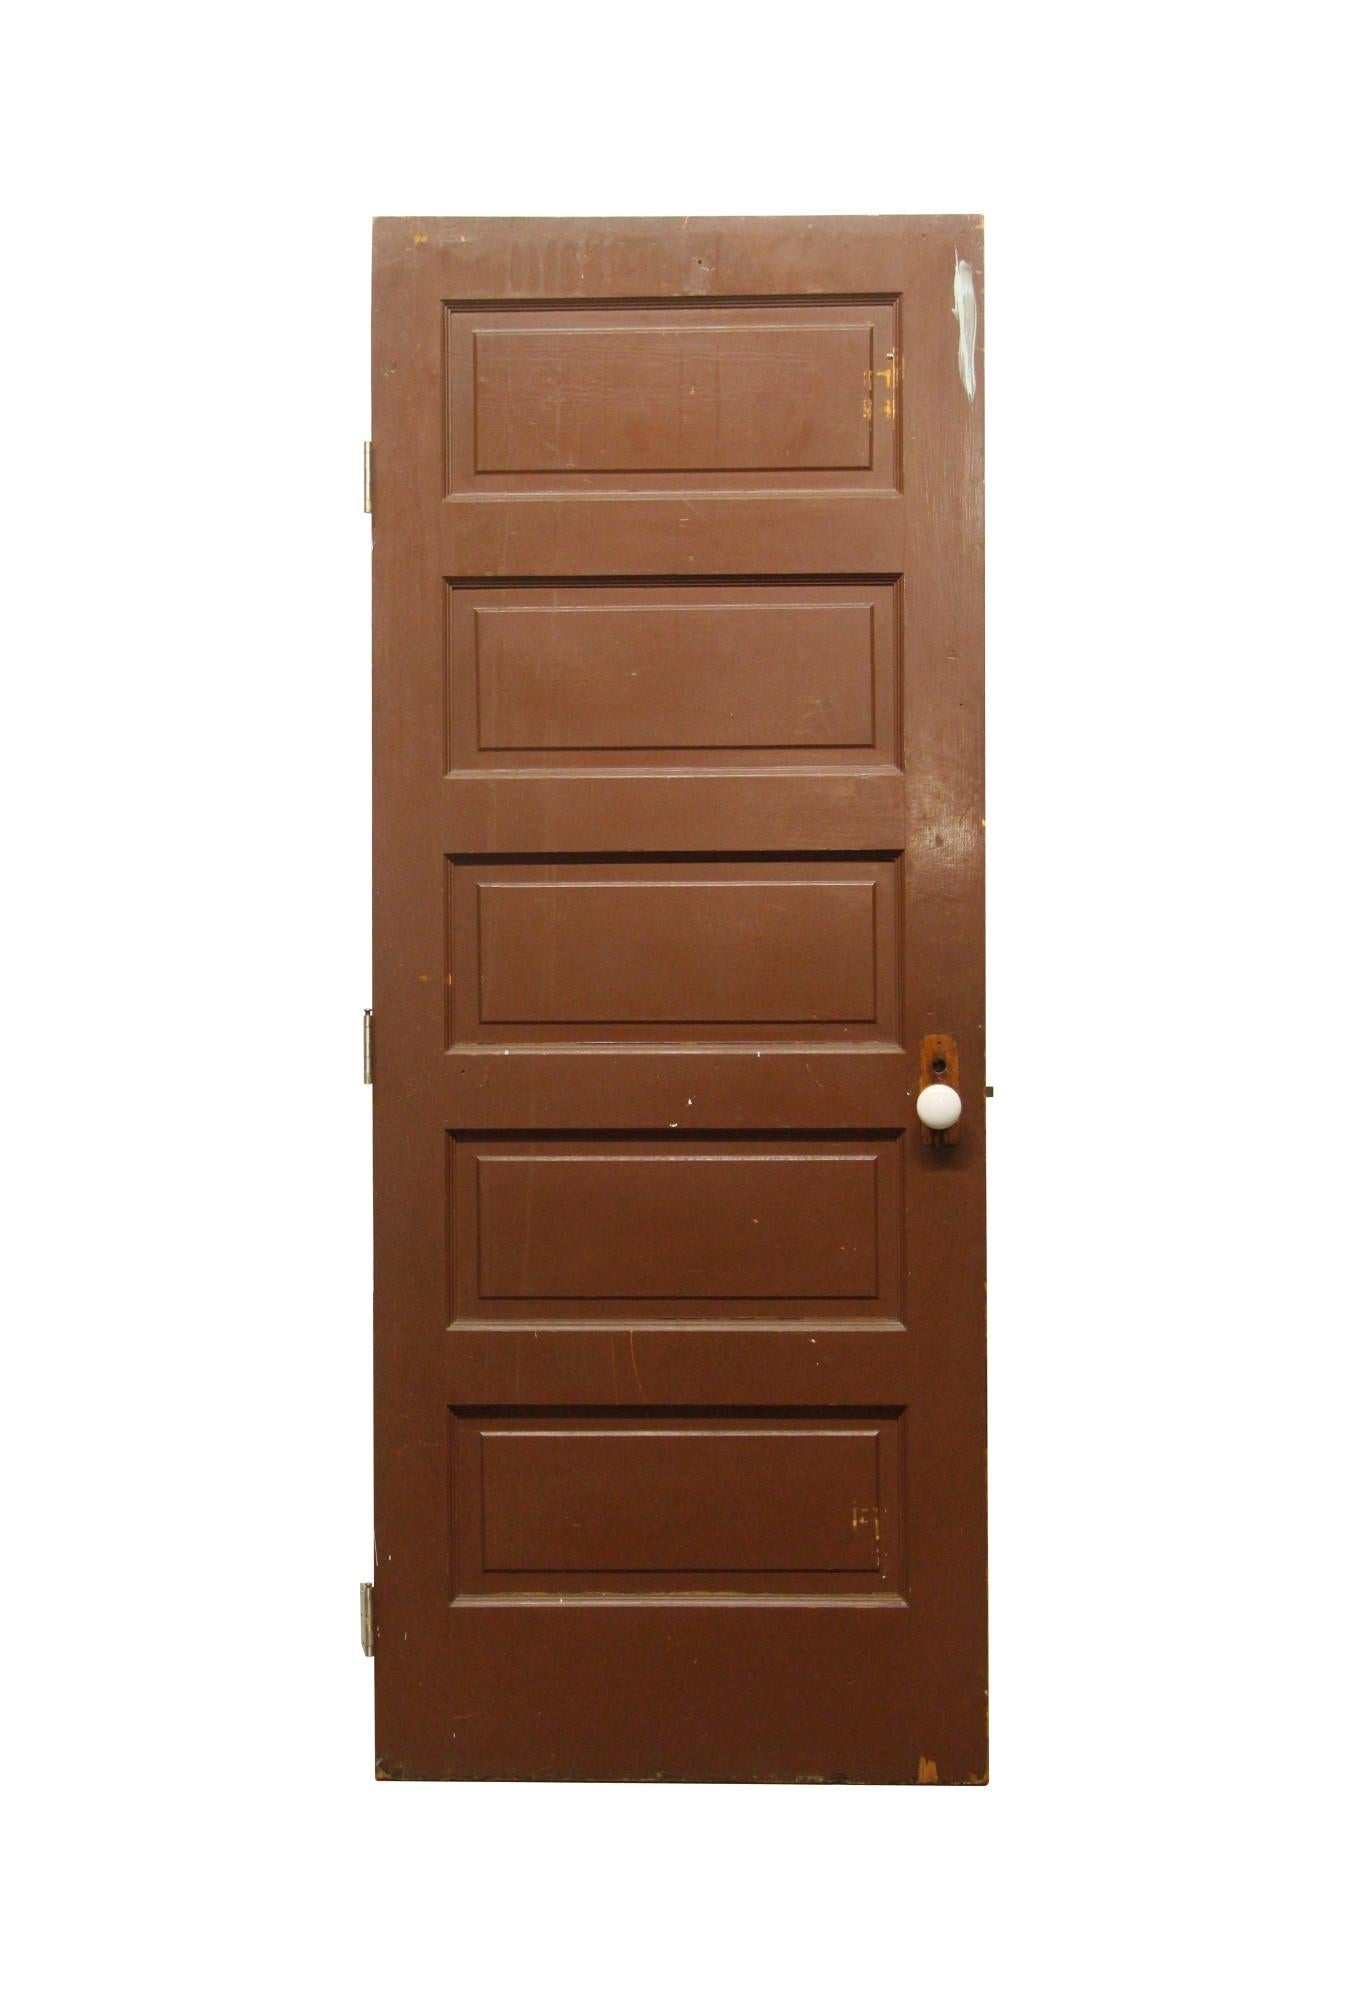 This antique 5 panel wood passage door is painted brown and comes with the original hardware. This can be seen at our 400 Gilligan St location in Scranton, PA.

 